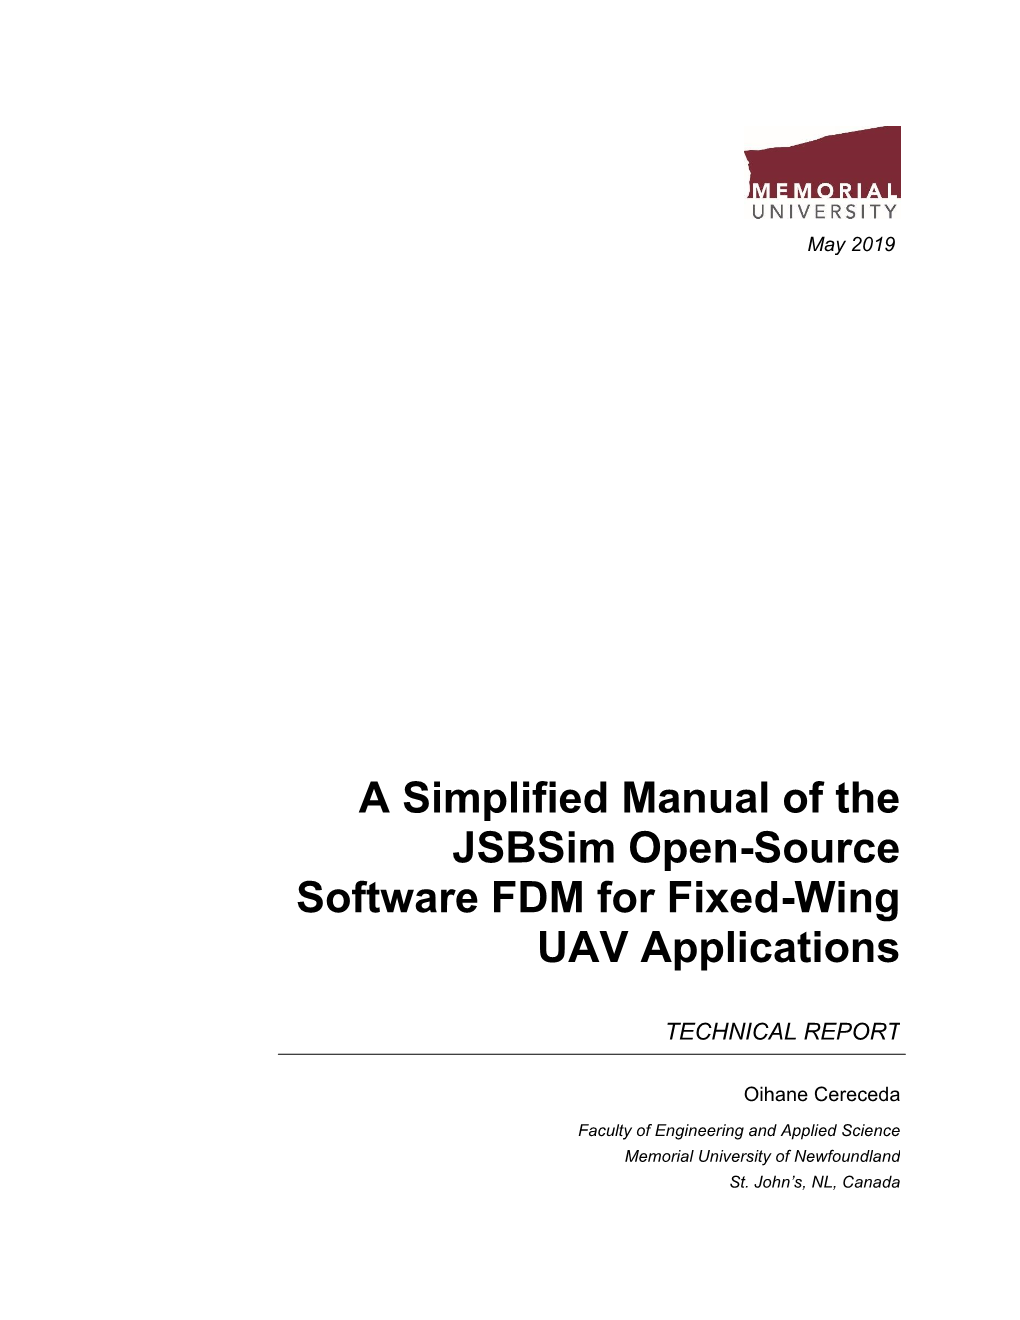 A Simplified Manual of the Jsbsim Open-Source Software FDM for Fixed-Wing UAV Applications